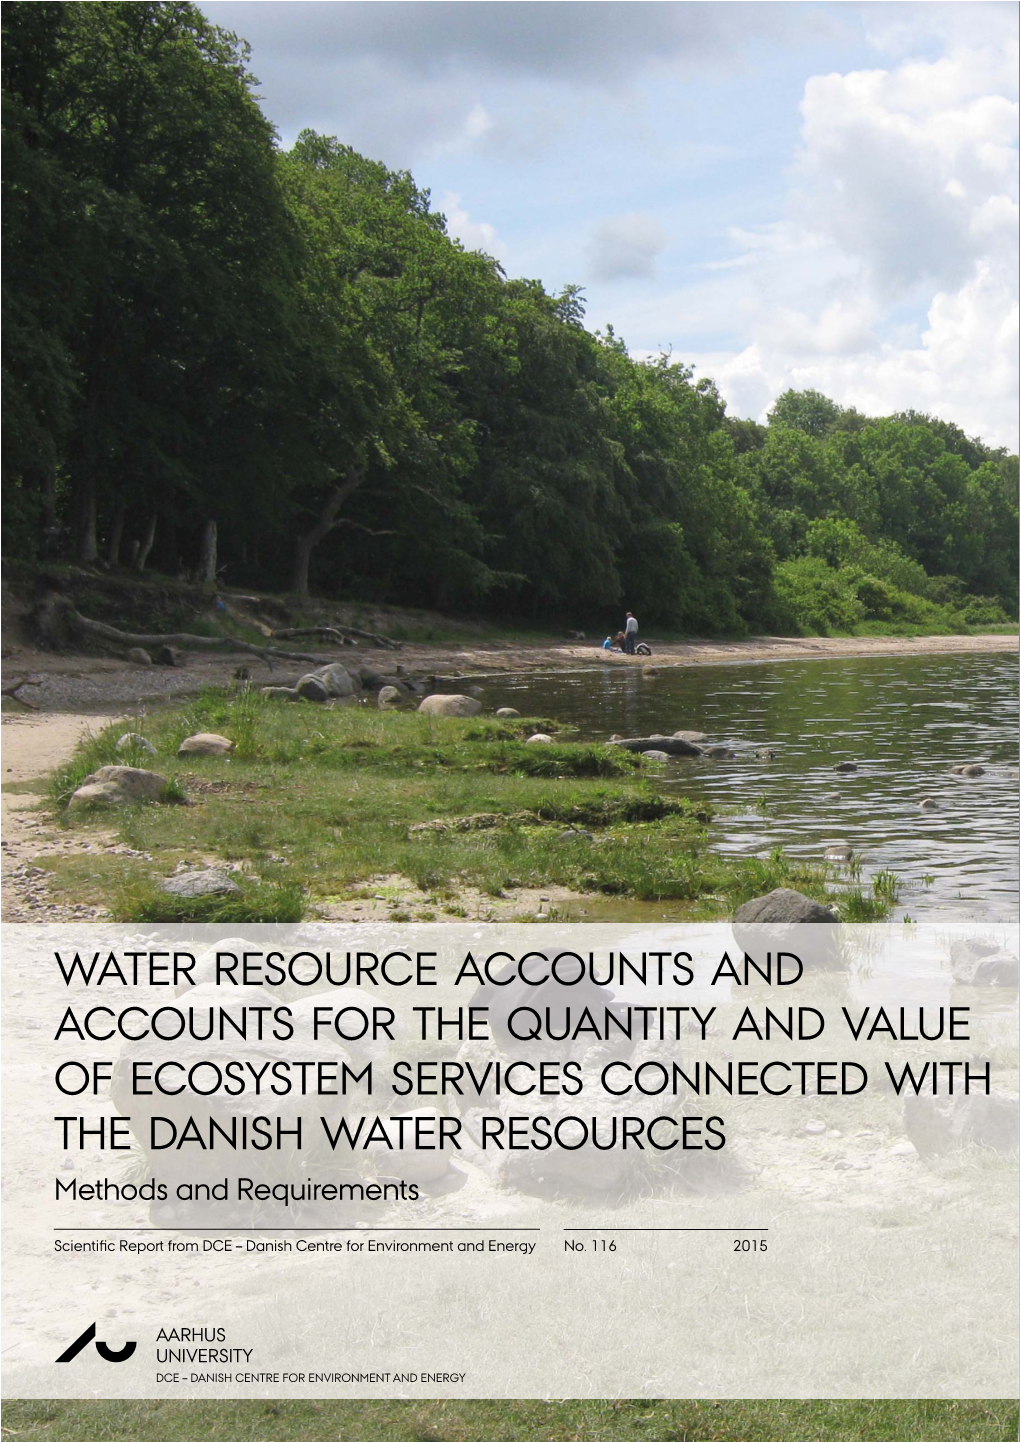 WATER RESOURCE ACCOUNTS and ACCOUNTS for the QUANTITY and VALUE of ECOSYSTEM SERVICES CONNECTED with the DANISH WATER RESOURCES Methods and Requirements